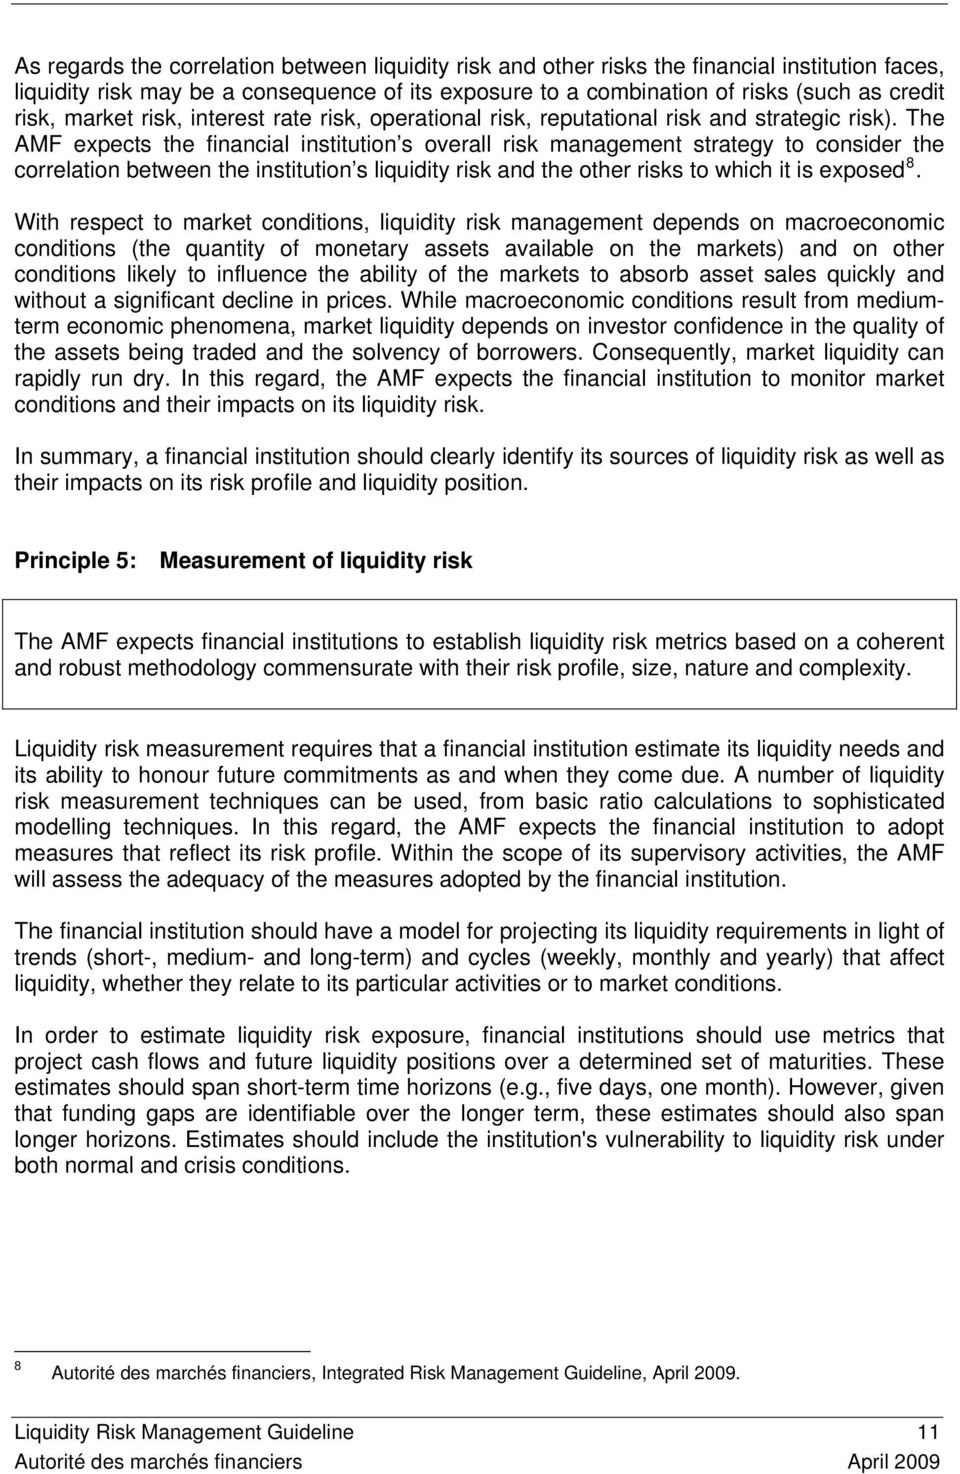 The AMF expects the financial institution s overall risk management strategy to consider the correlation between the institution s liquidity risk and the other risks to which it is exposed 8.